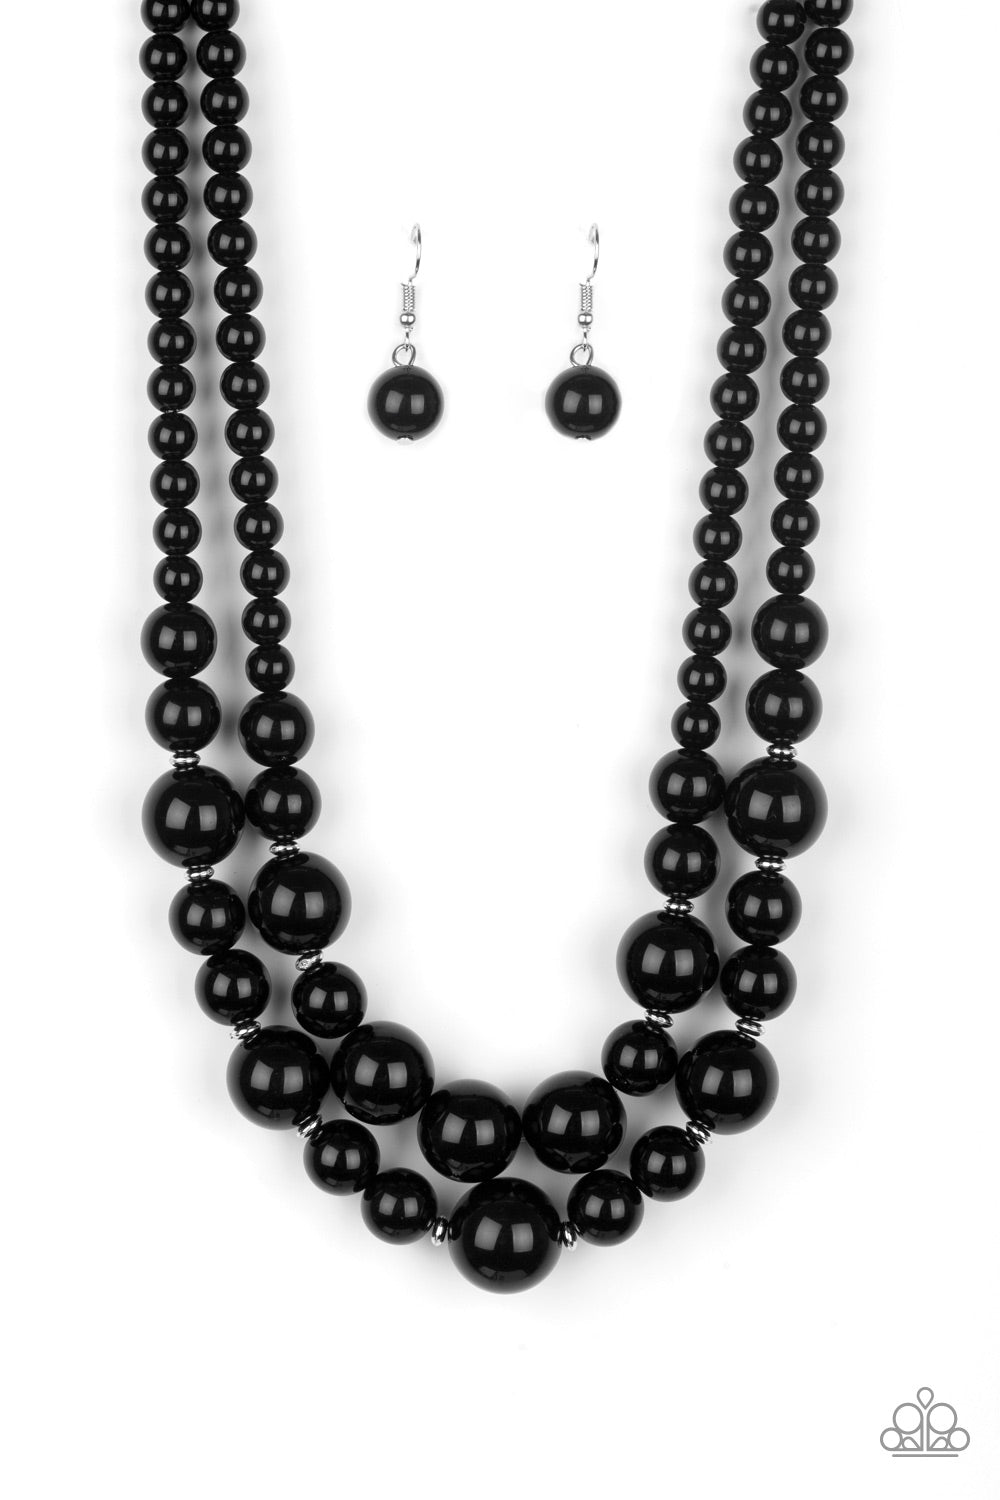 The More The Modest Black Necklace - Paparazzi Accessories   Infused with dainty silver accents, shiny black beads layer below the collar in a timeless fashion. Features an adjustable clasp closure.  Sold as one individual necklace. Includes one pair of matching earrings.